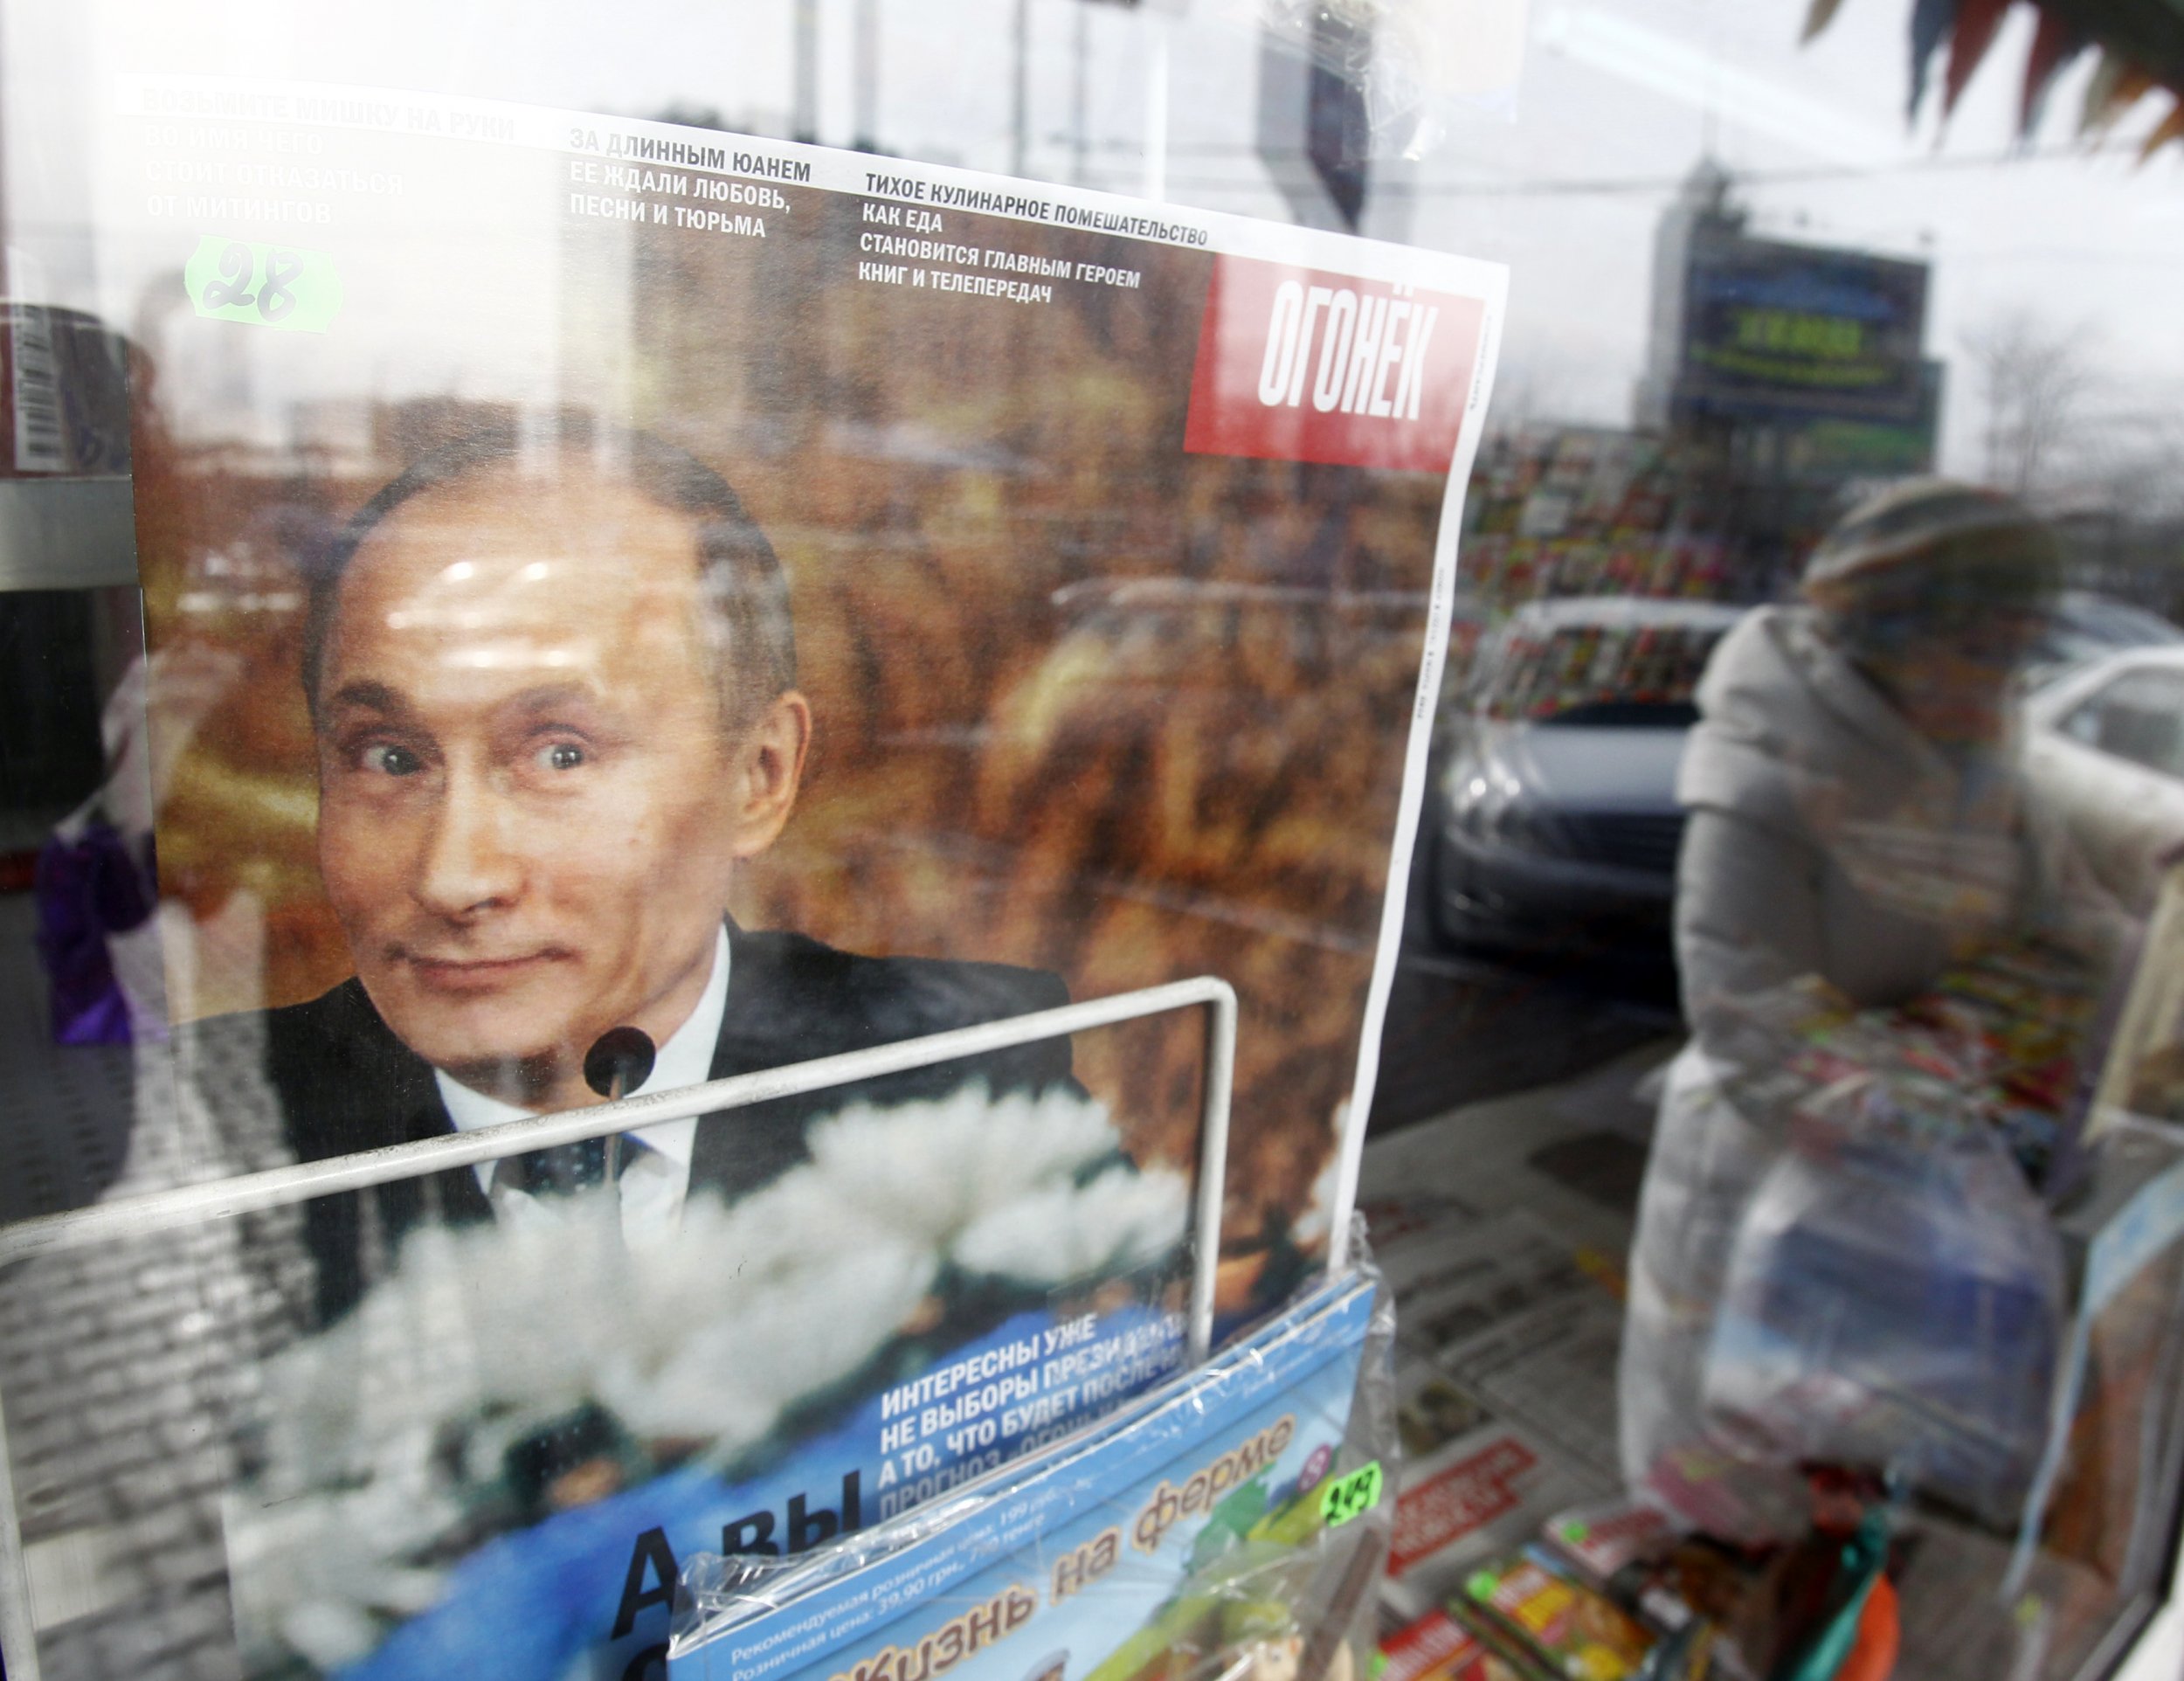 Putin smiles on the cover of a magazine at a kiosk